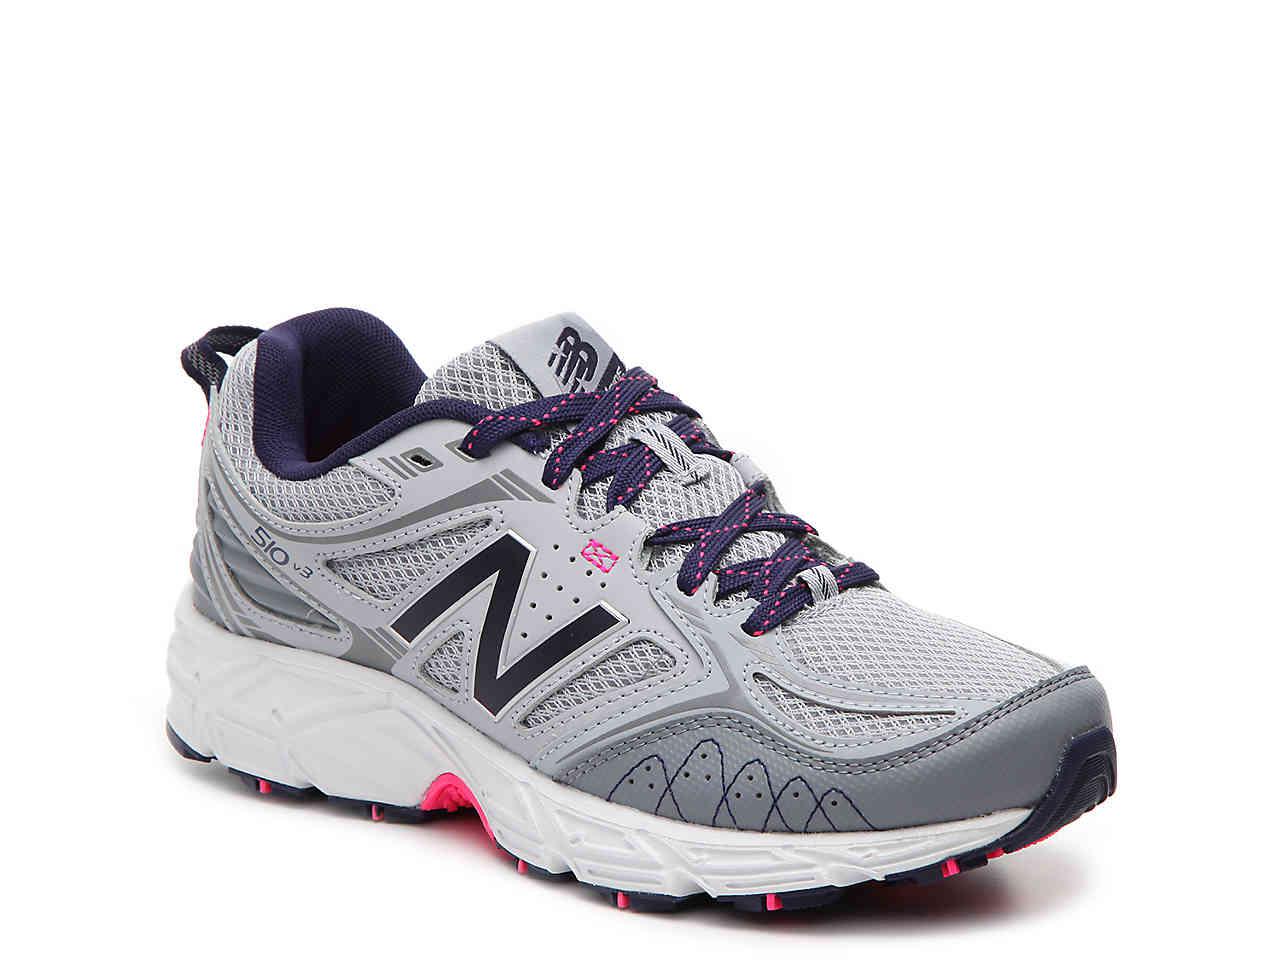 New Balance Synthetic 510 V3 Trail Running Shoe - Lyst